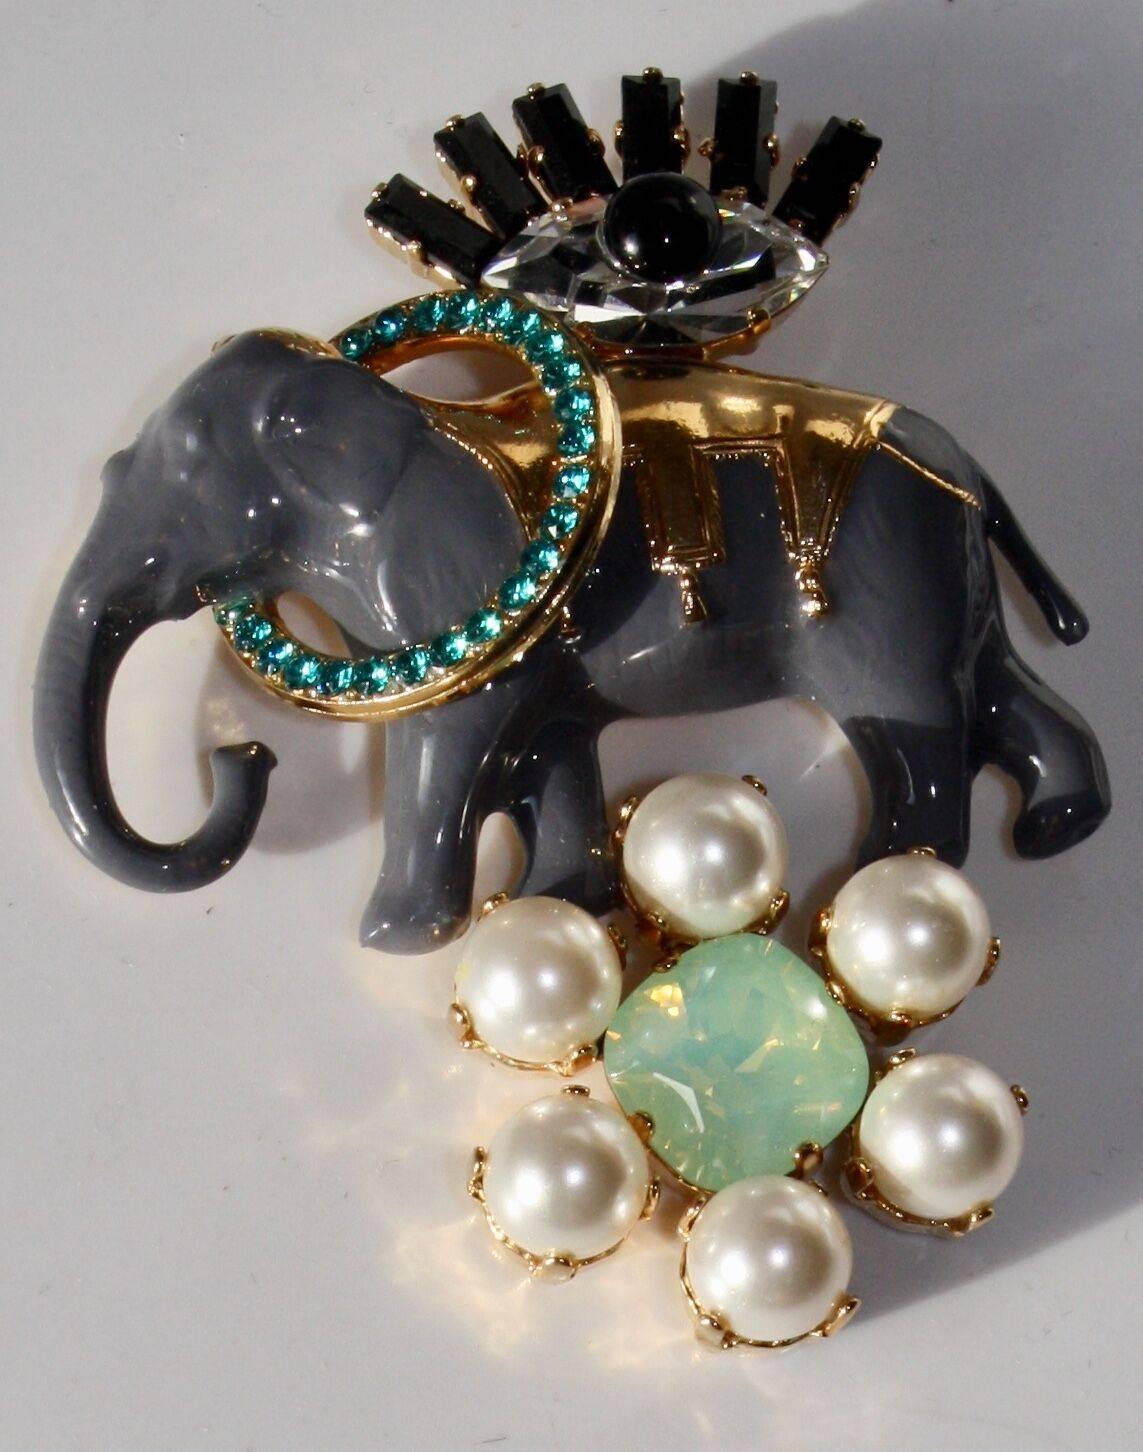 Swarovski crystal, glass pearl, and resin elephant pin from Philippe Ferrandis. 